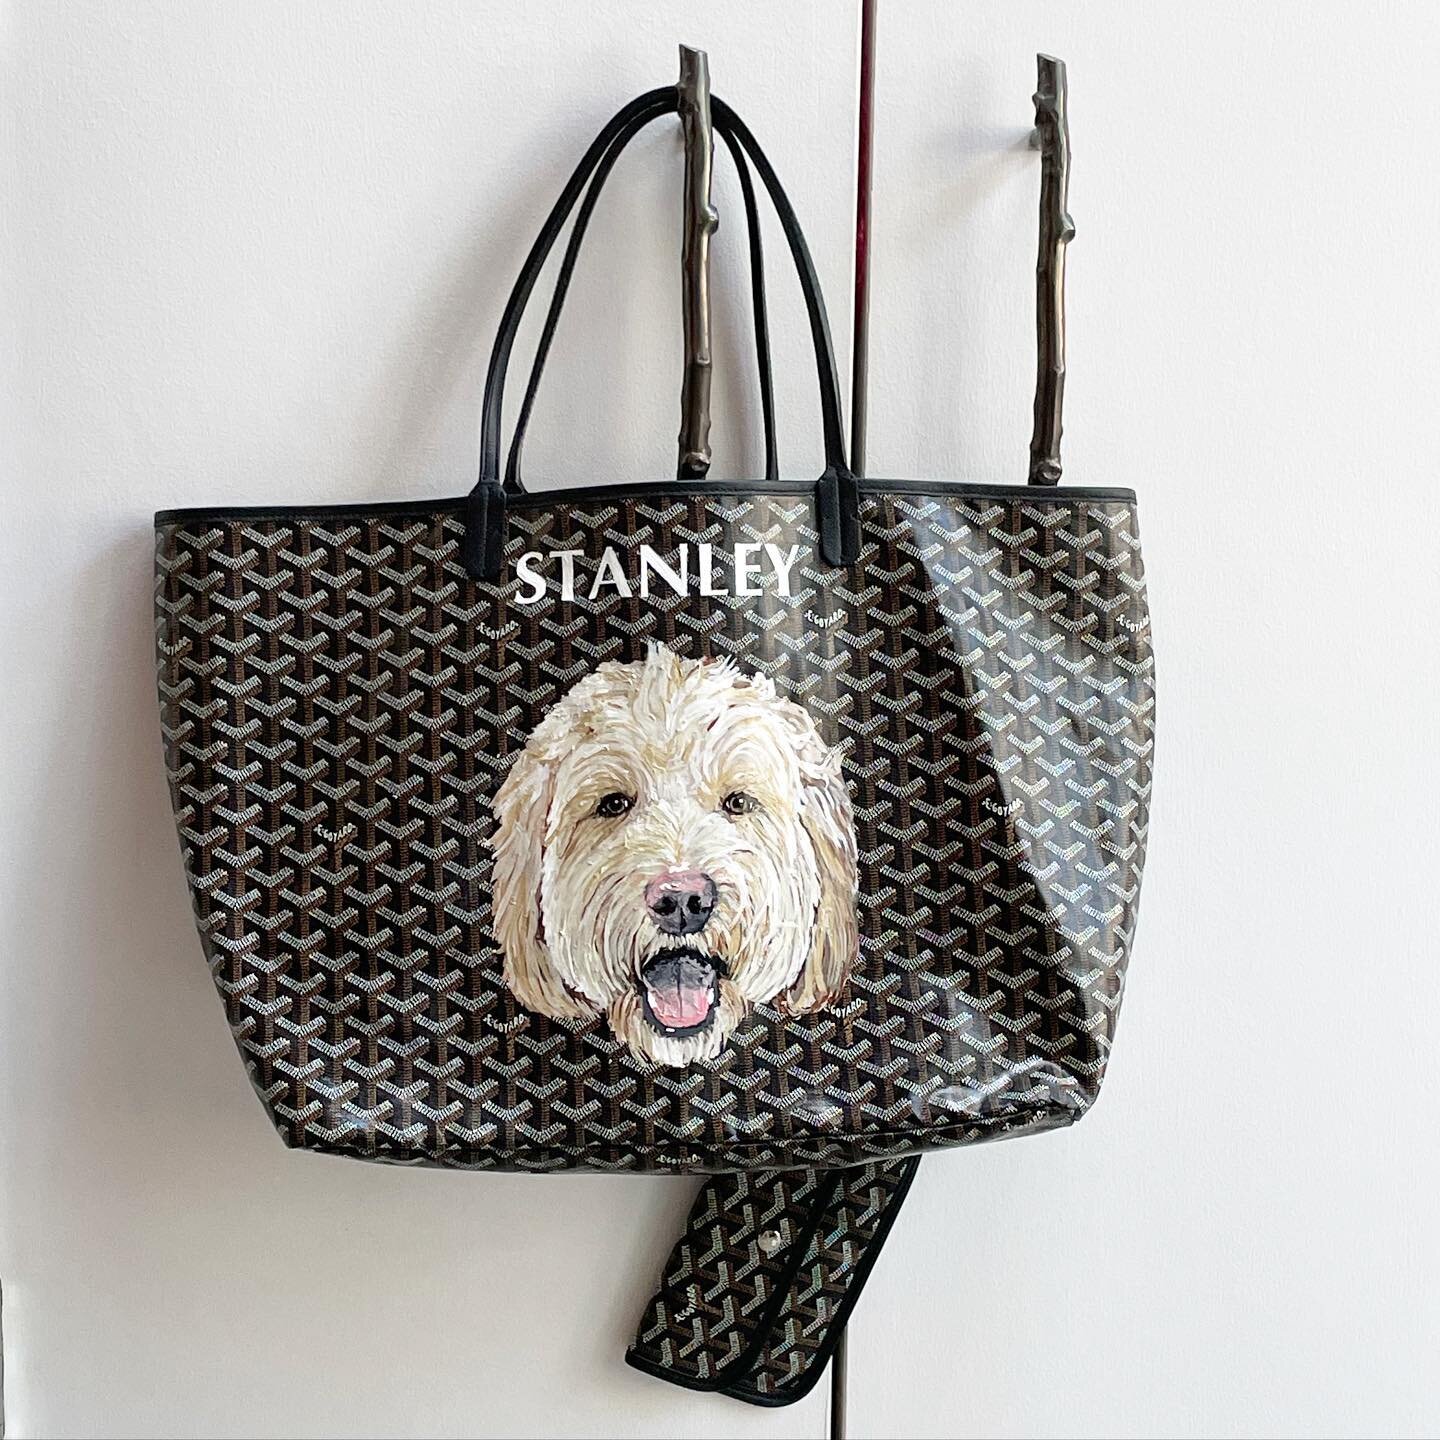 Upcycle your bags with #P&ecirc;t&agrave;Portrait - and make it wearable art. 

#goldendudeleathers #dogsofinstagram #doodlesofinstagram #goyard #handpainted #madeinnyc #doglover #nyc #sustainableart #personalization #artwork #luxury #upcycling